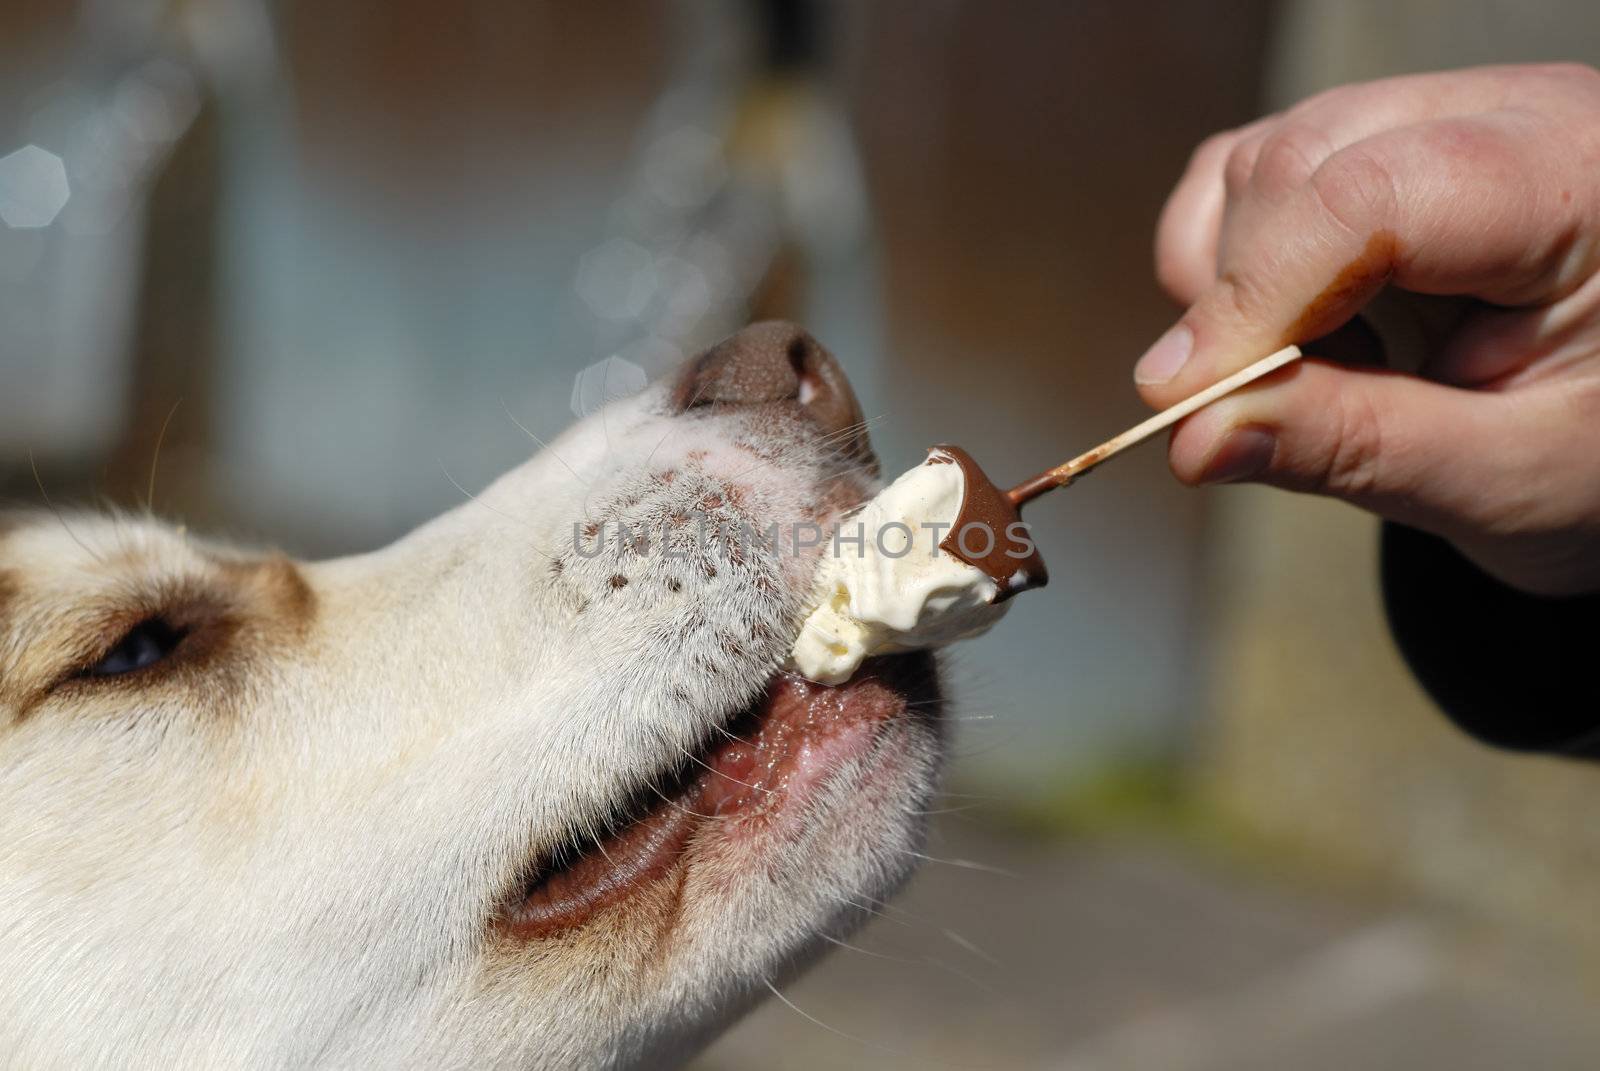 Husky dog eating icecream from owners hand.